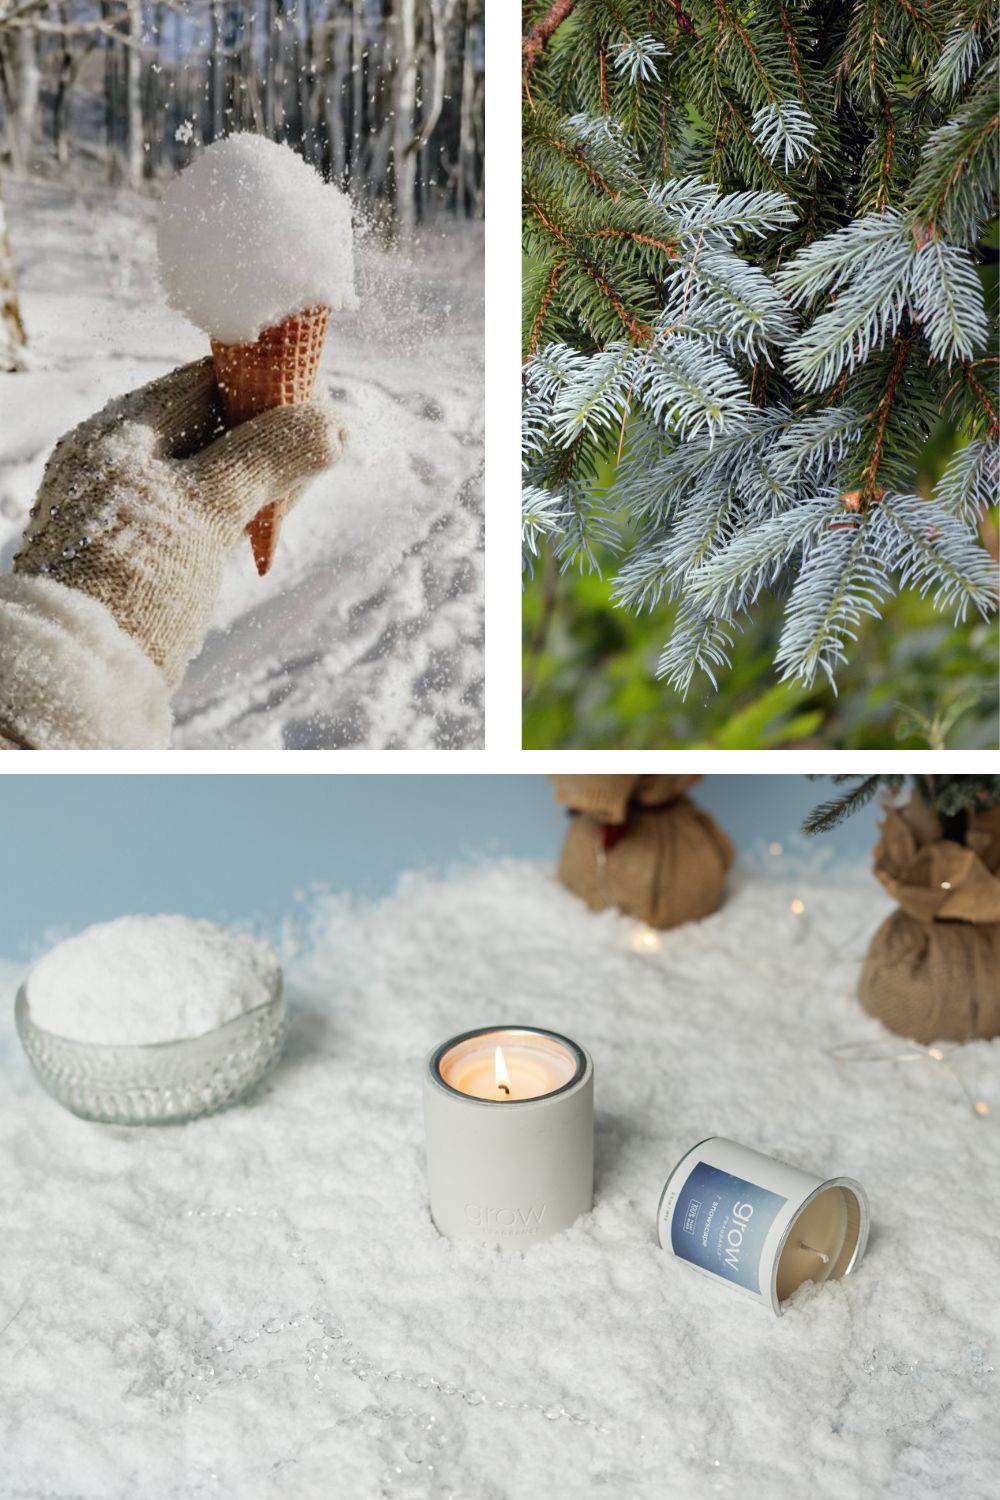 Winter Mint, Fresh Fallen Snow, and Vanilla Candle: Experience the Essence of Snowscape in a Cozy Evening Setting